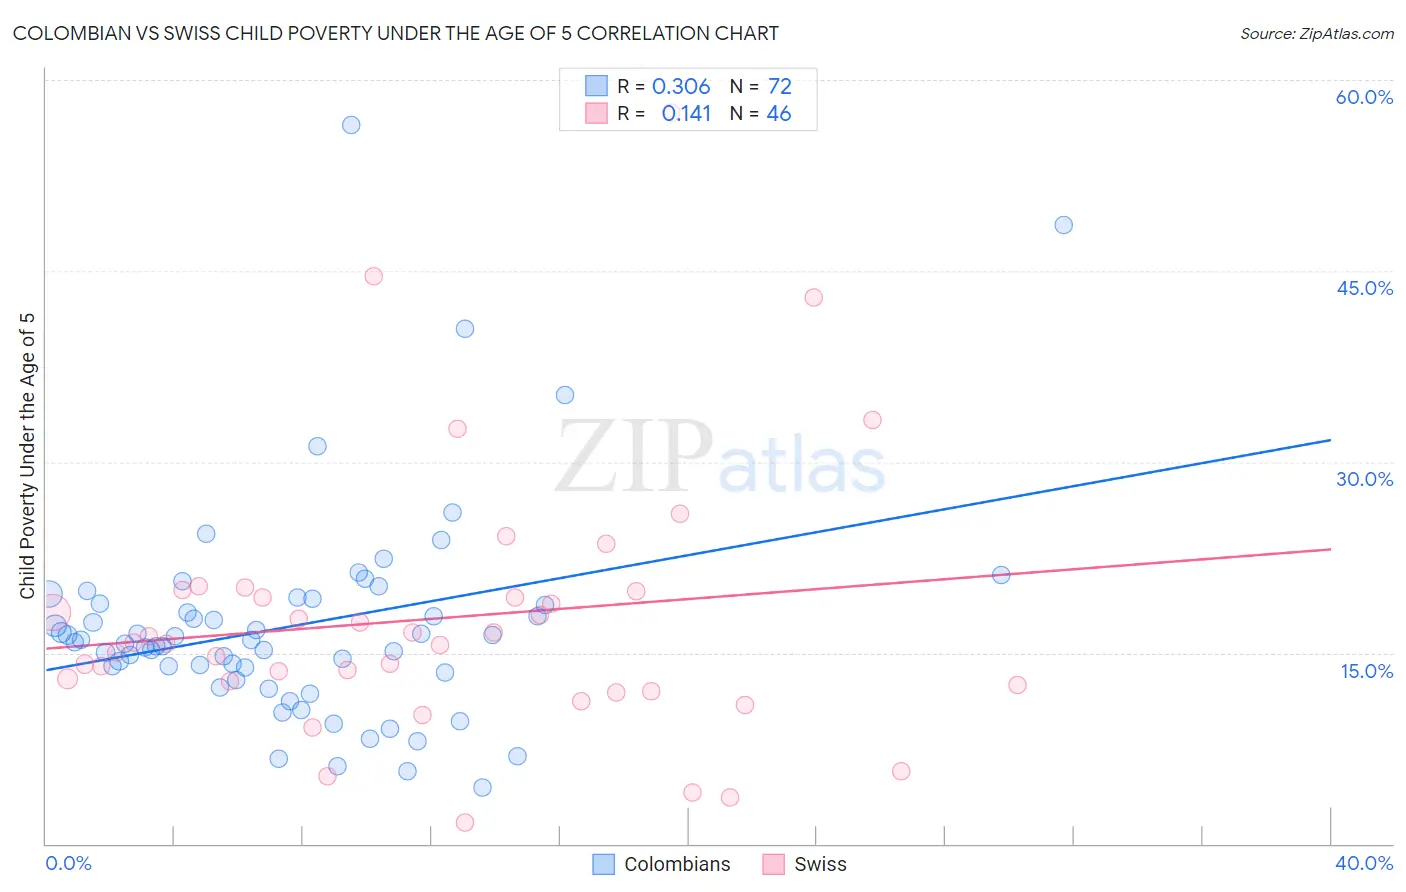 Colombian vs Swiss Child Poverty Under the Age of 5